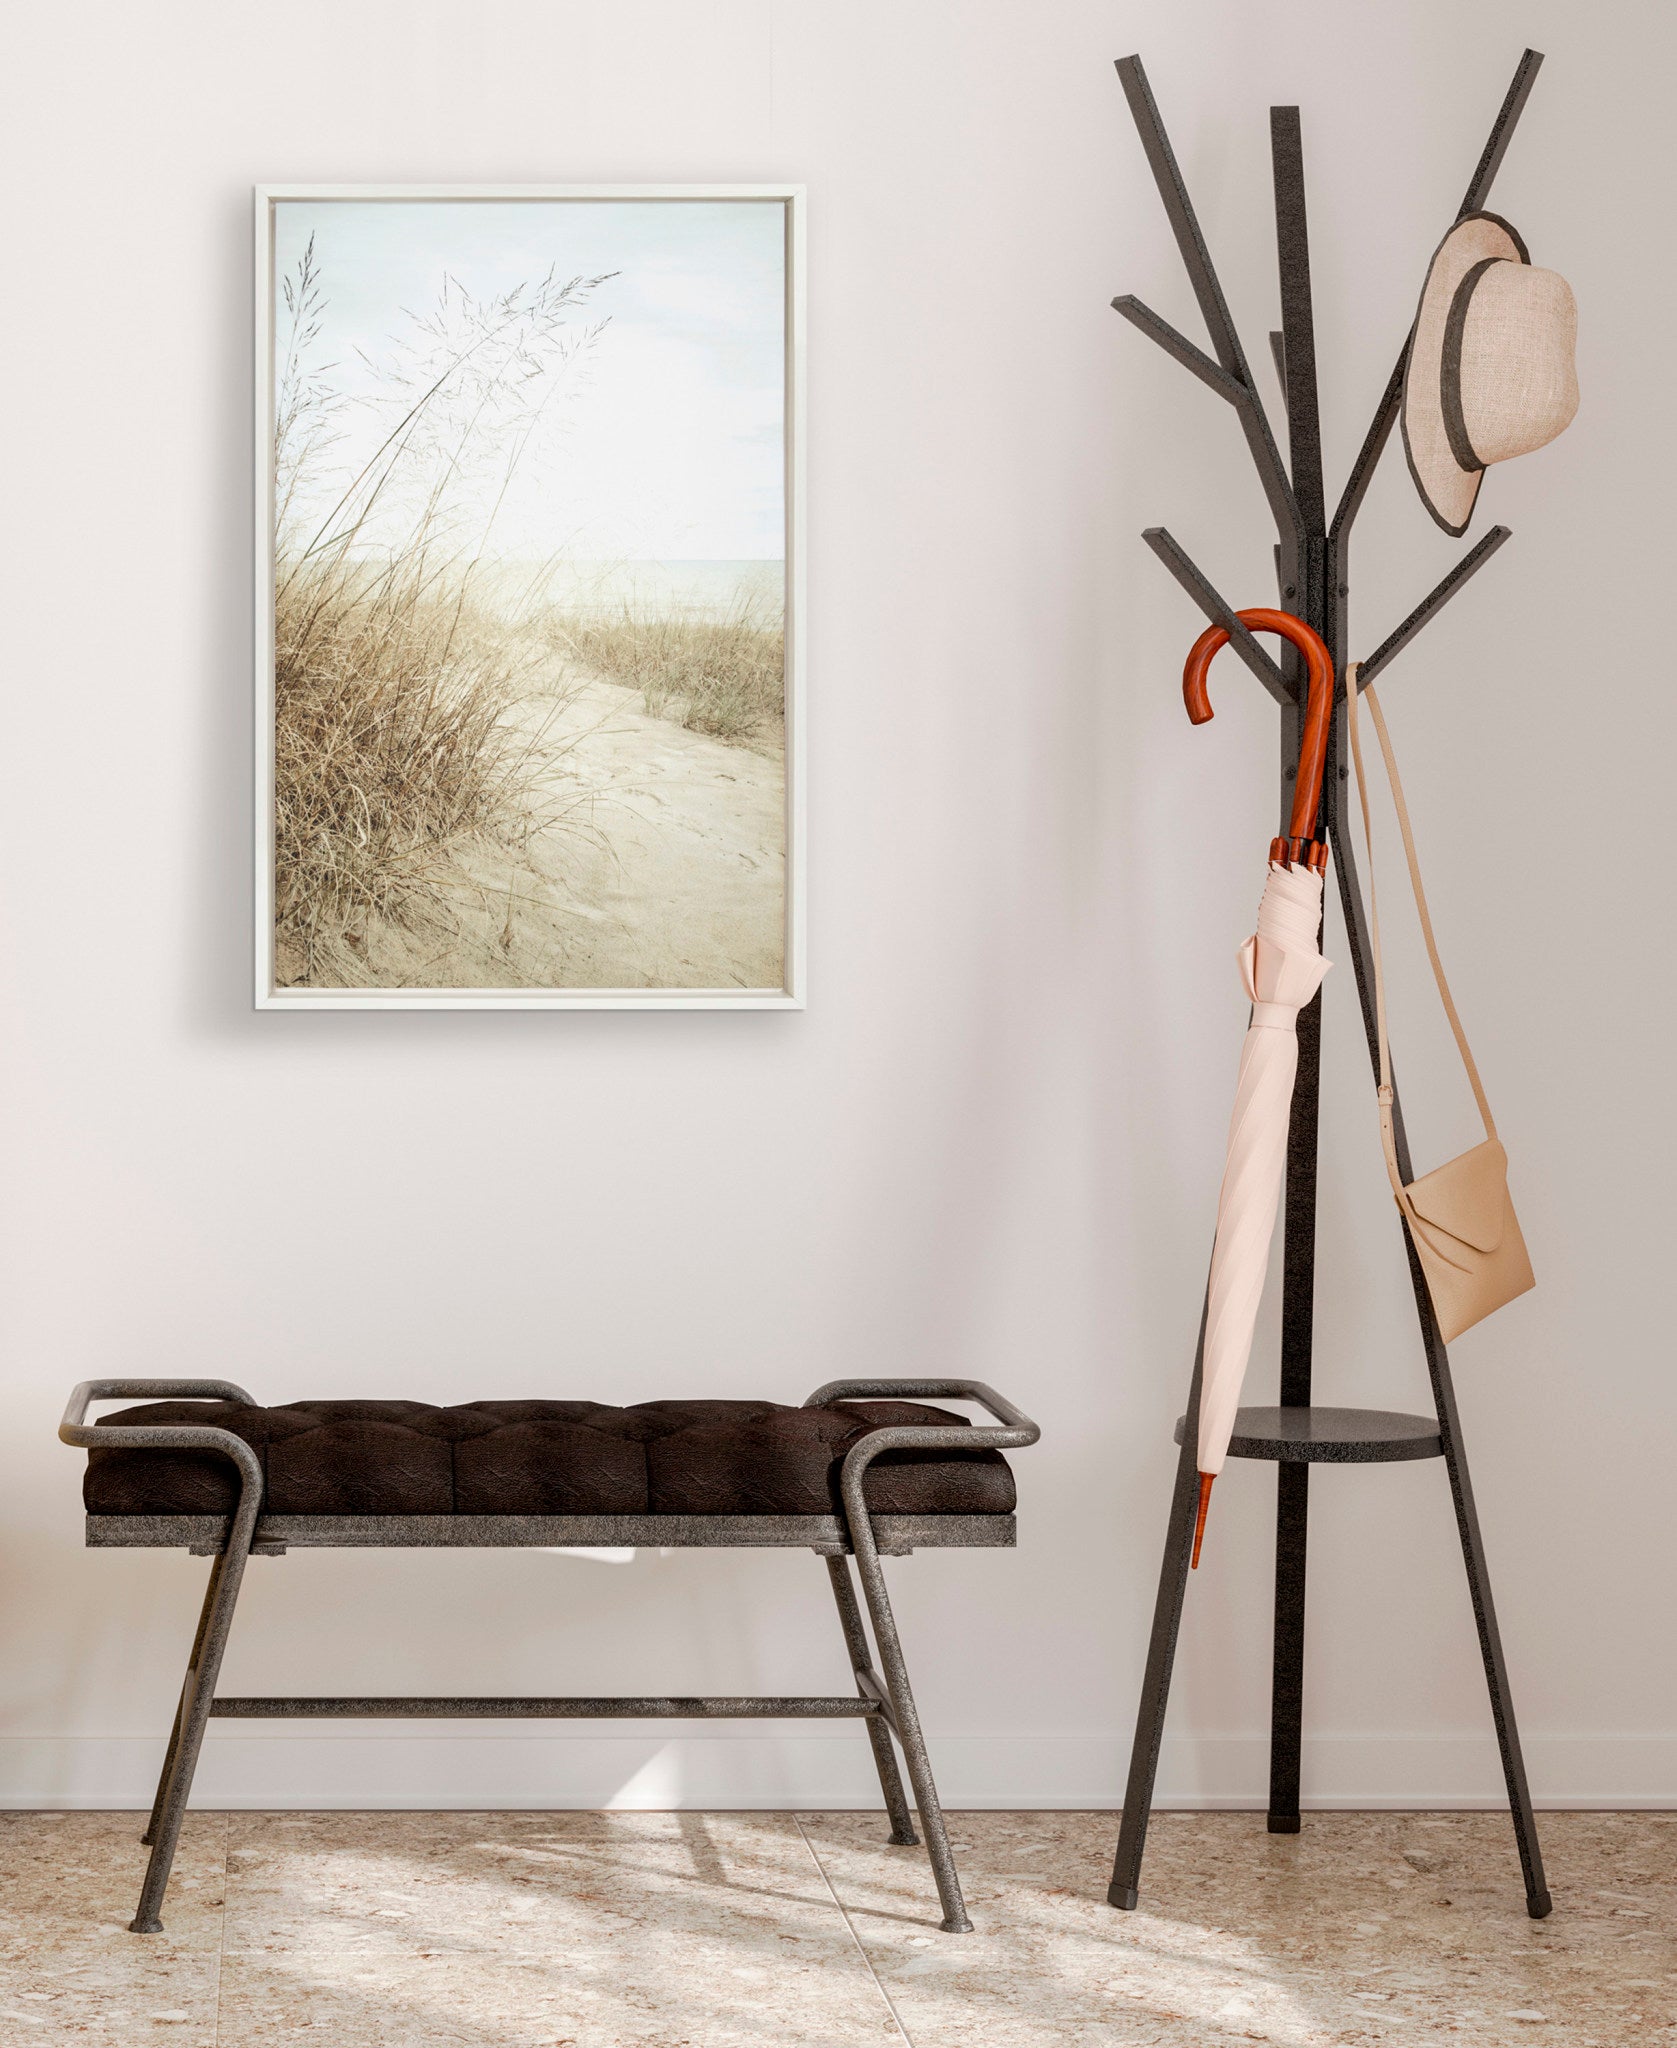 Sylvie Beach Grasses Framed Canvas by Emiko and Mark Franzen of F2Images